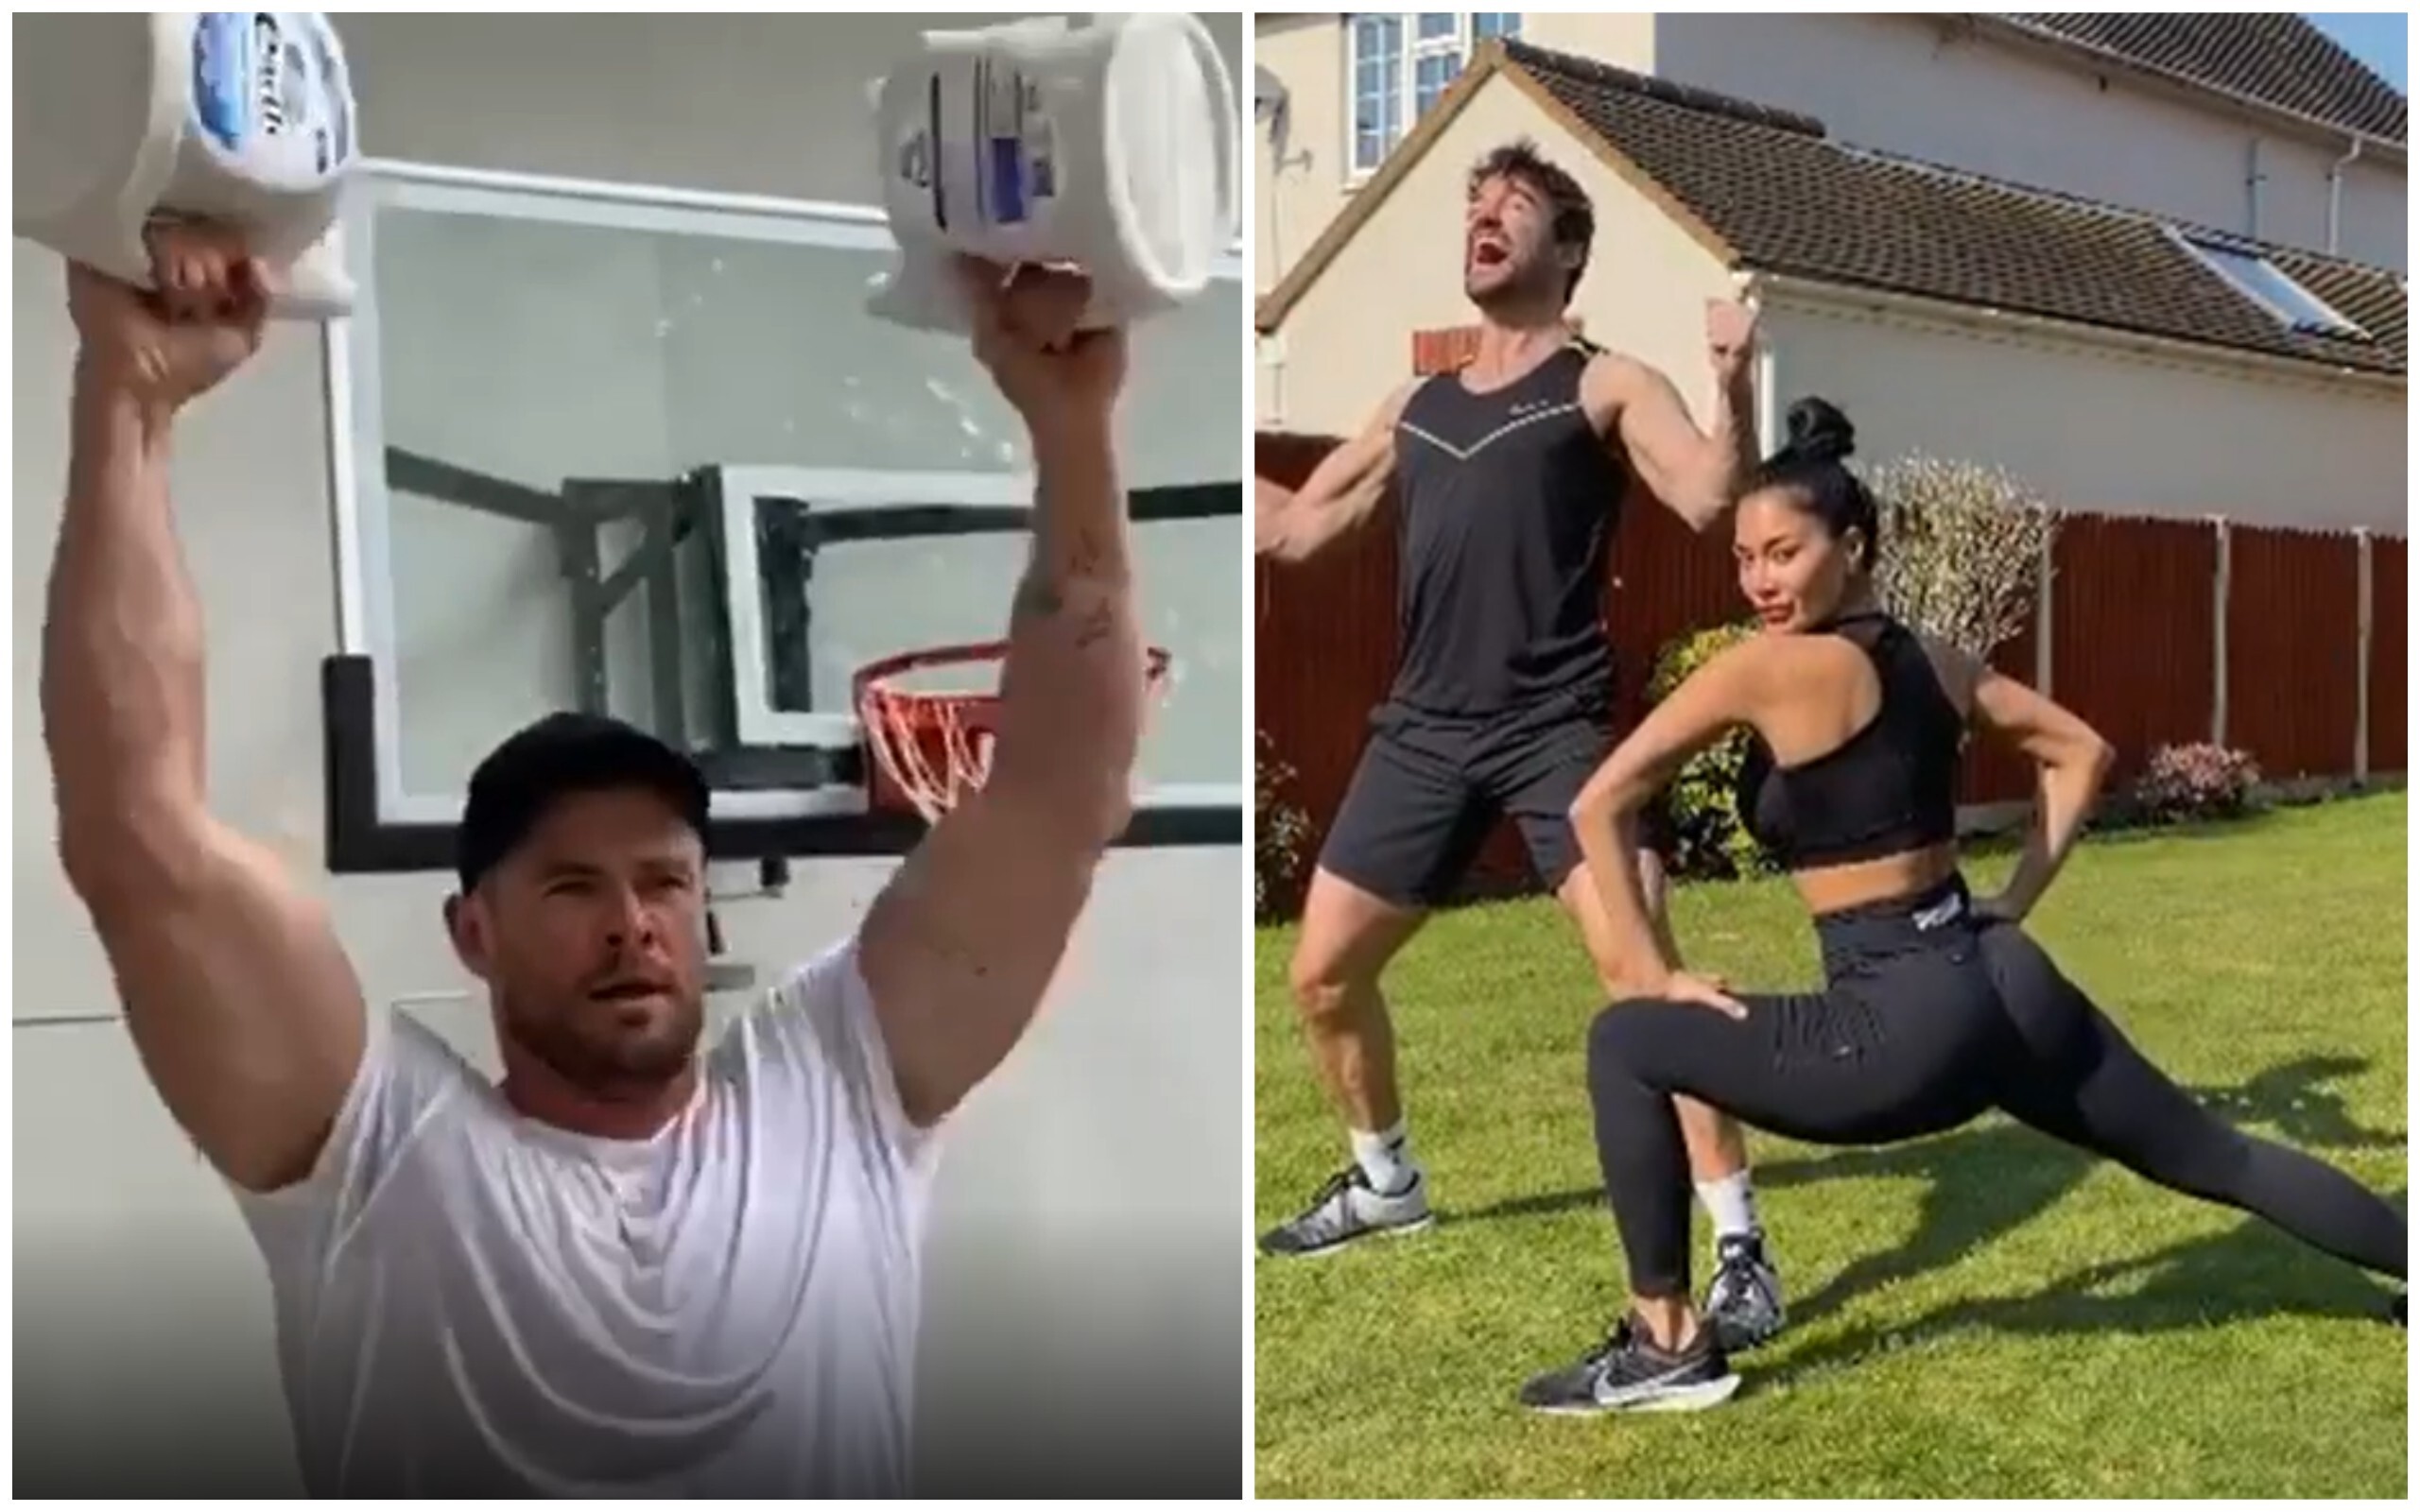 Looking for home workouts? Follow celebrities Chris Hemsworth, Nicole Scherzinger, Thom Evans, Mark Wahlberg, and Molly Sims for no or minimal equipment workouts. Photos: Instagram